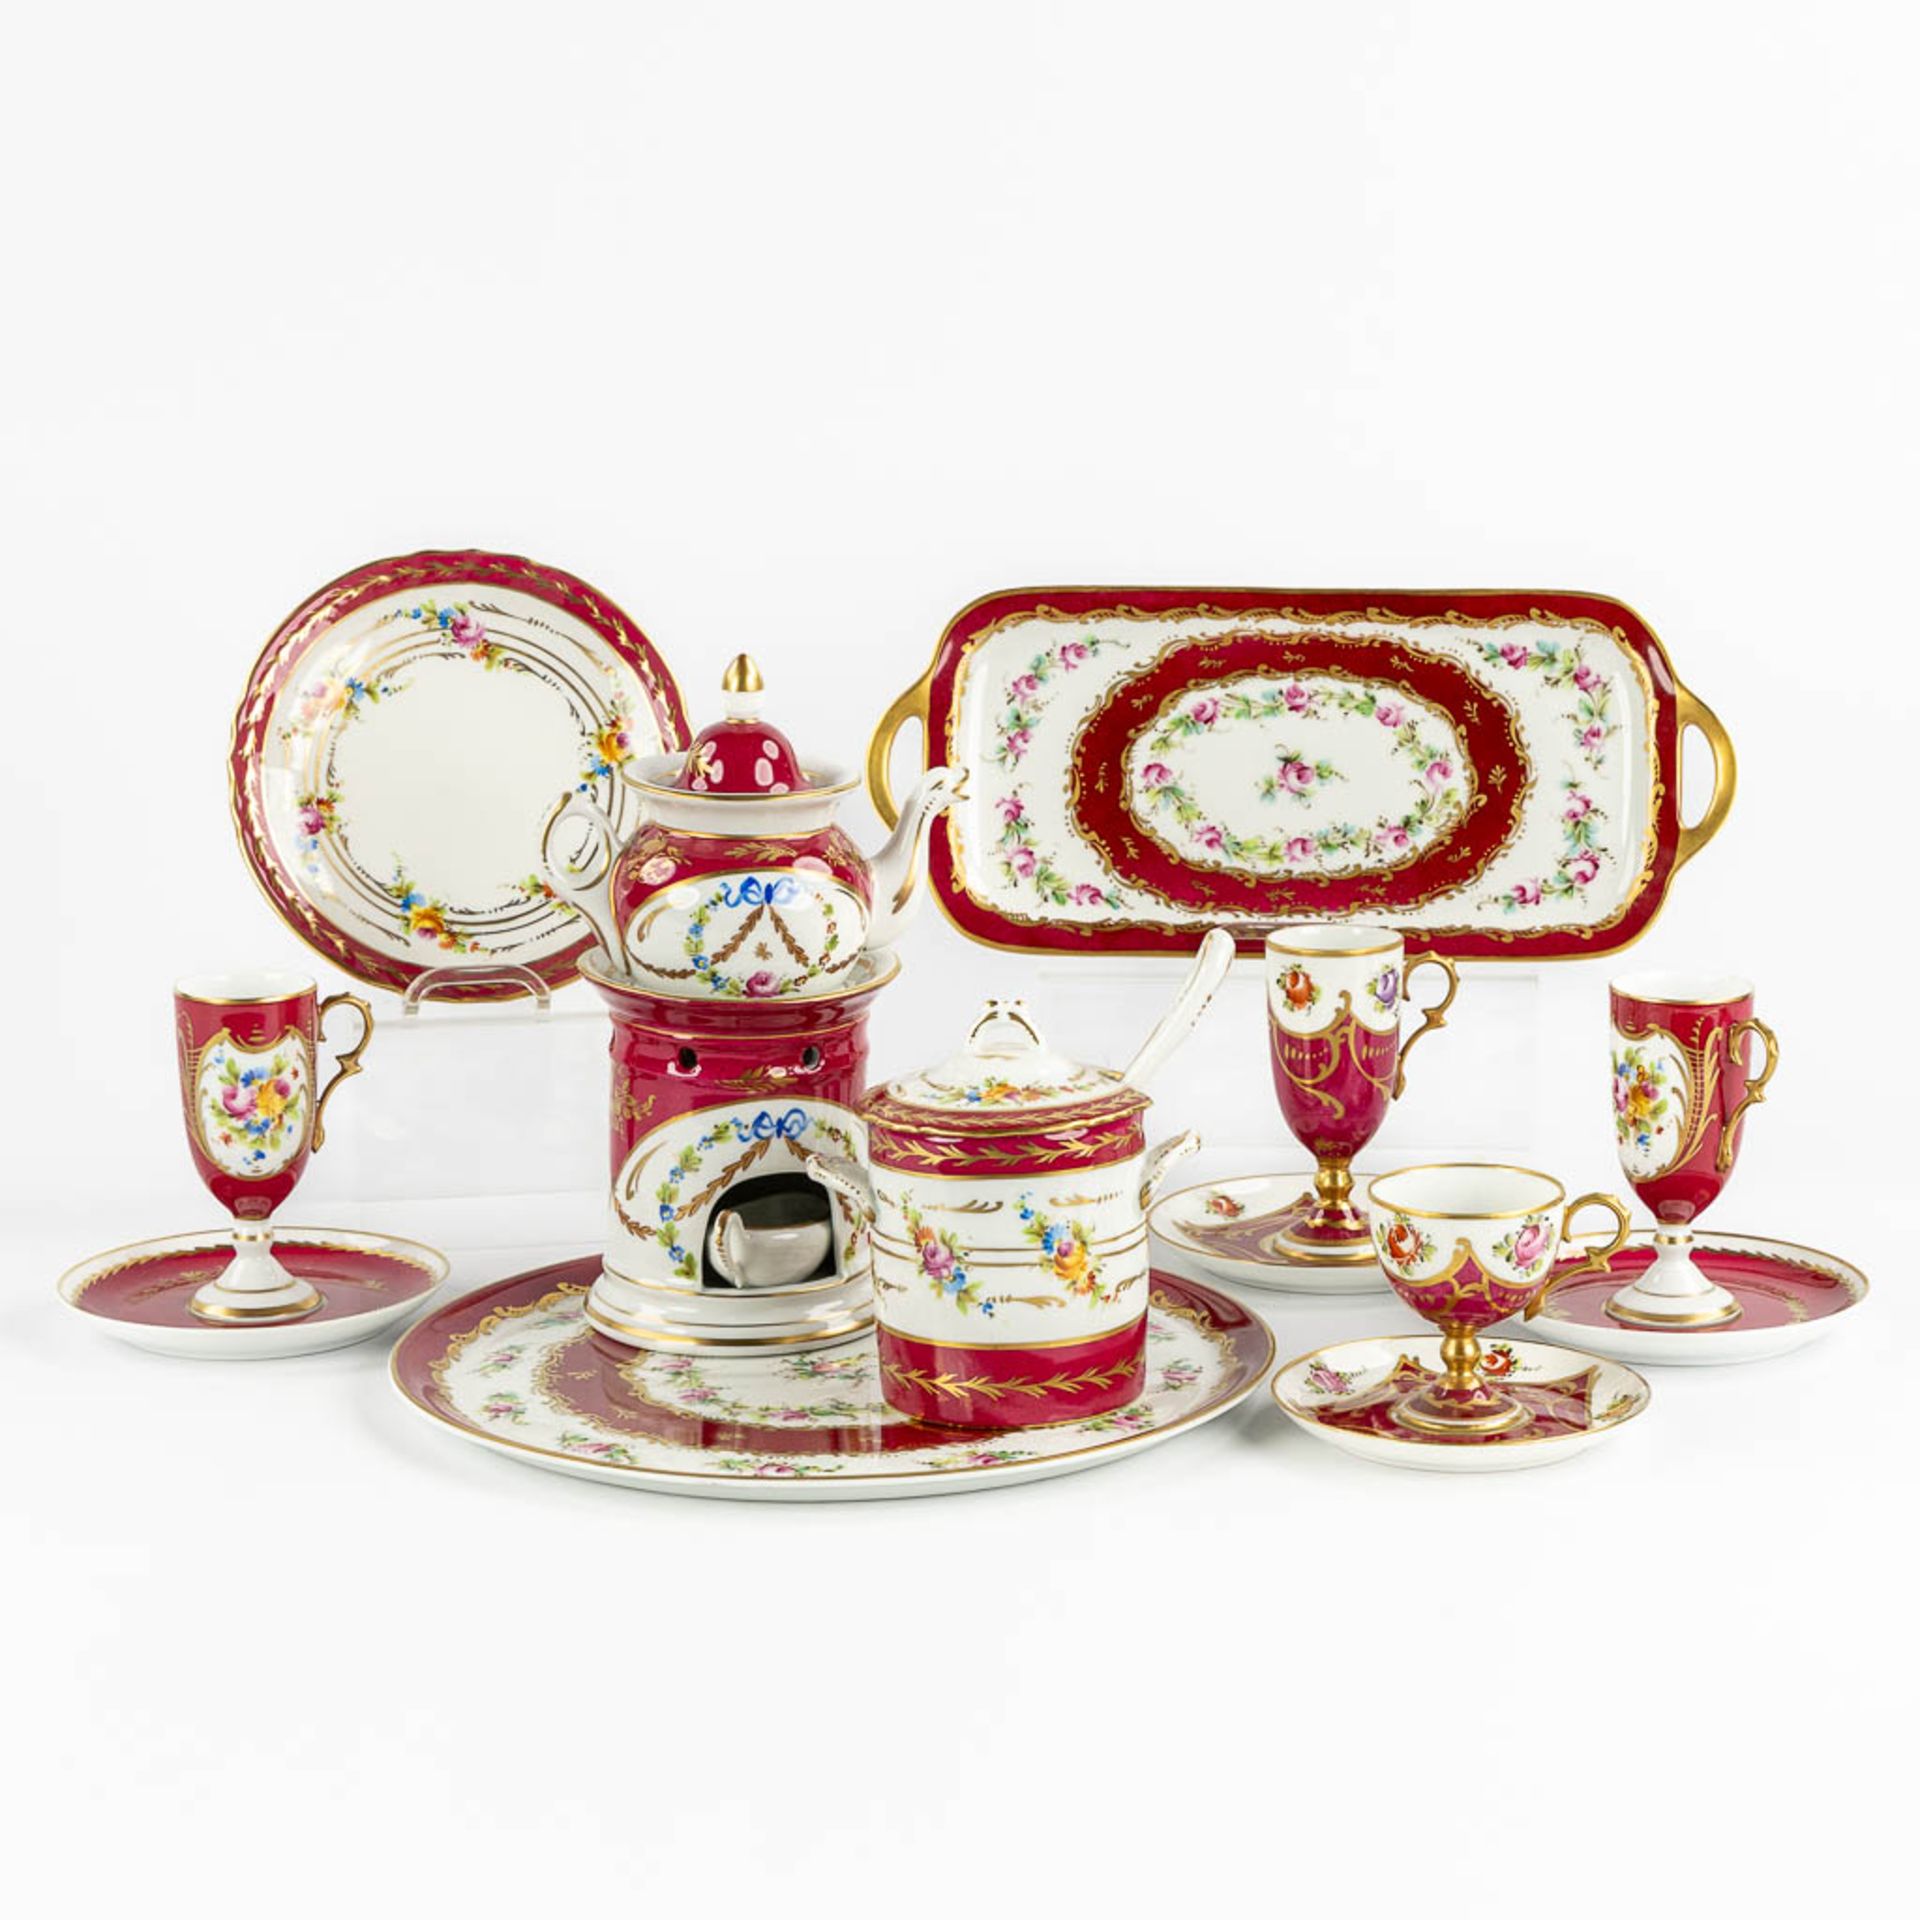 Giraud Limoges, a coffee service and serving ware, polychrome porcelain. 20th C. (H: 24 cm)